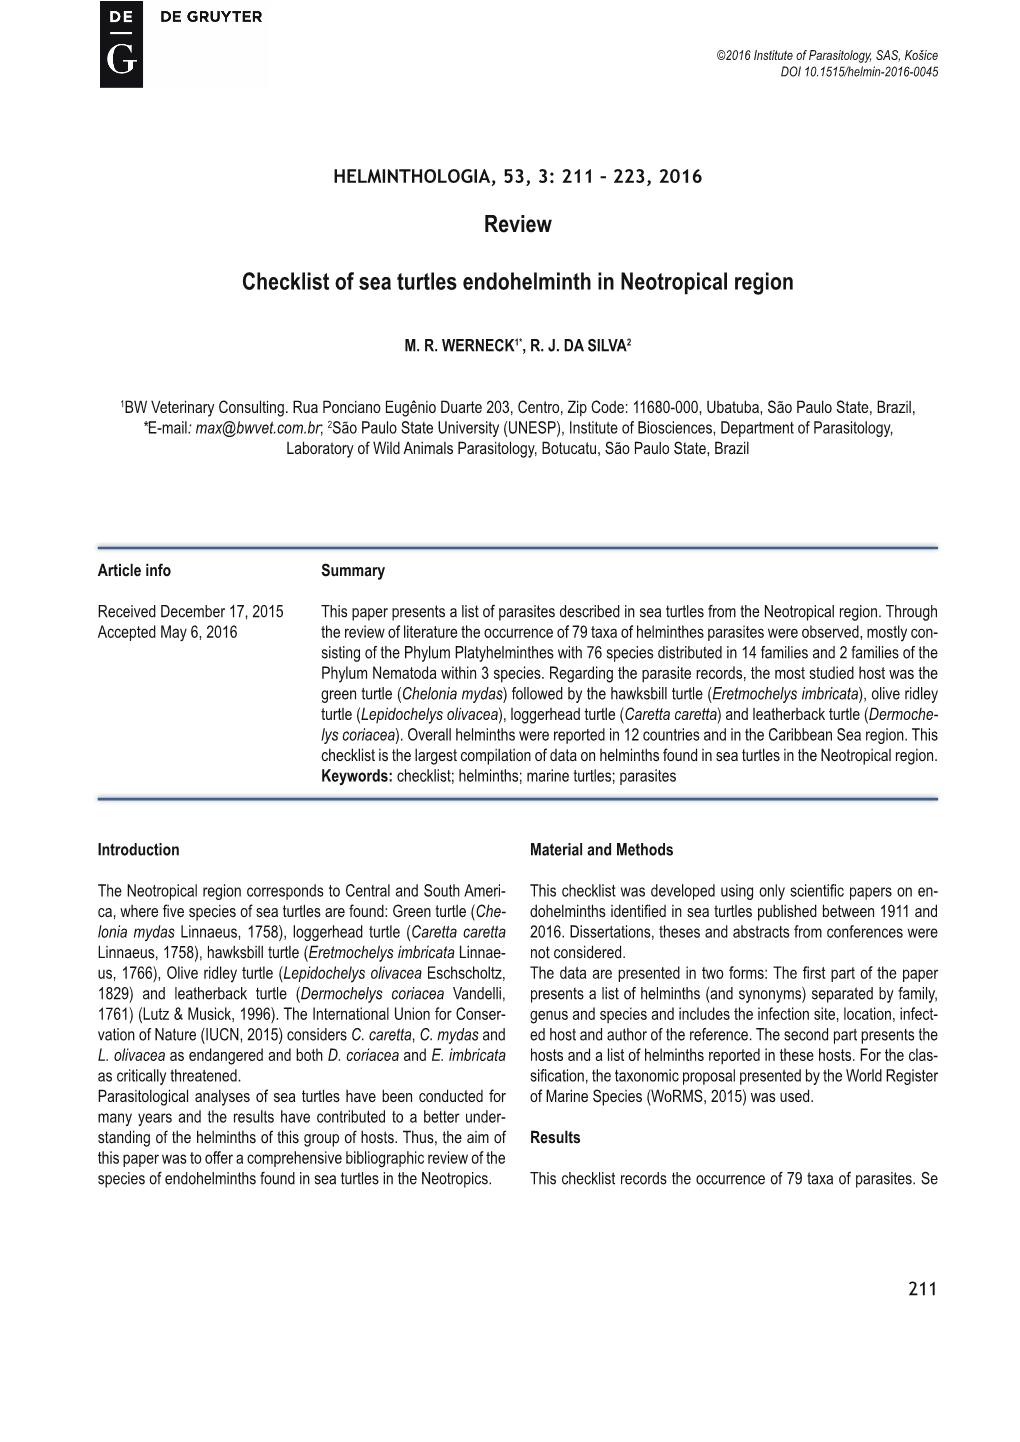 Review Checklist of Sea Turtles Endohelminth in Neotropical Region